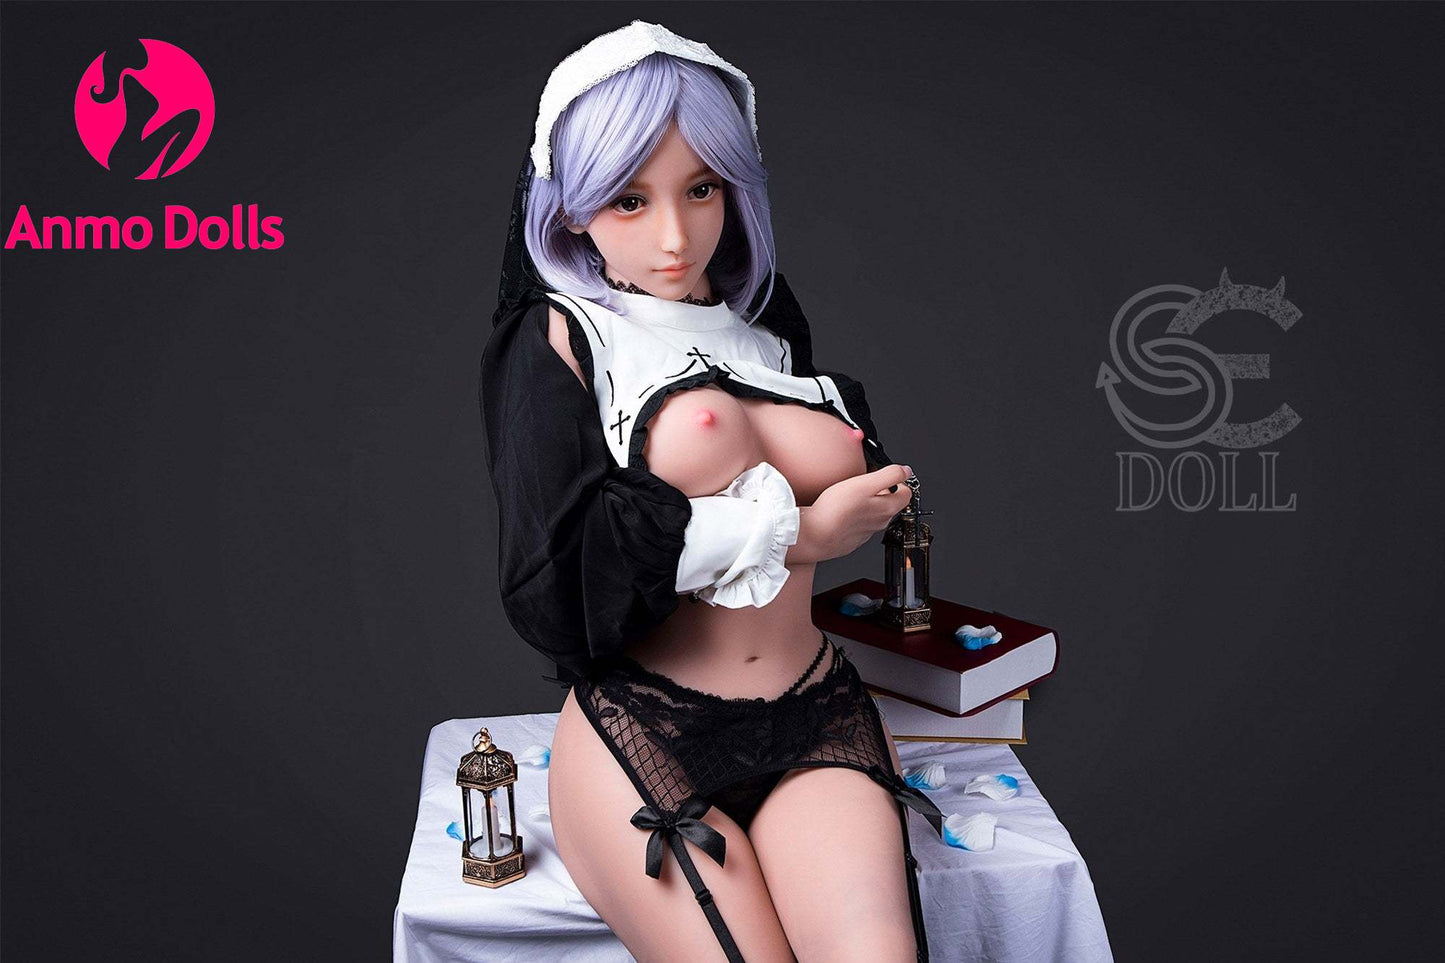 Enter a World of Fantasy with Tamara - Blue Haired TPE Sex Doll for Your Wildest Desires